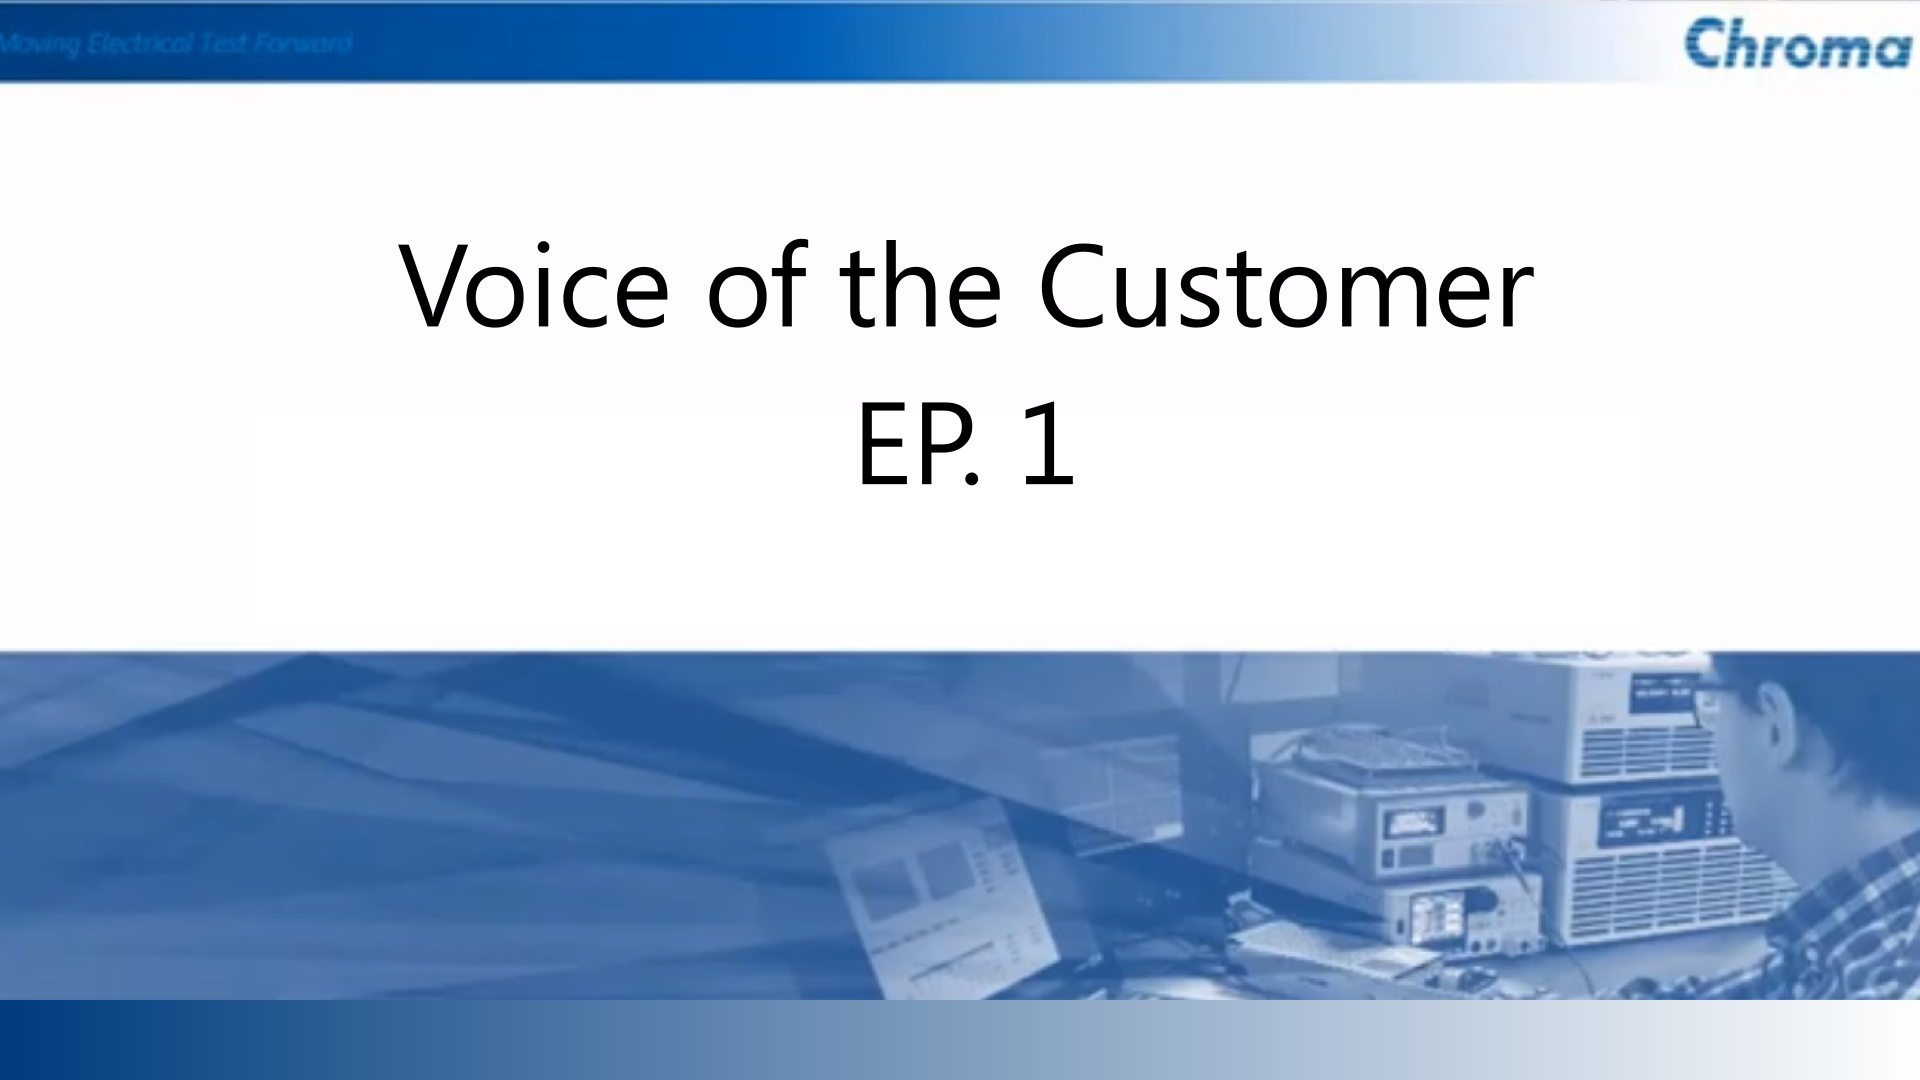 Voice of the Customer EP 1